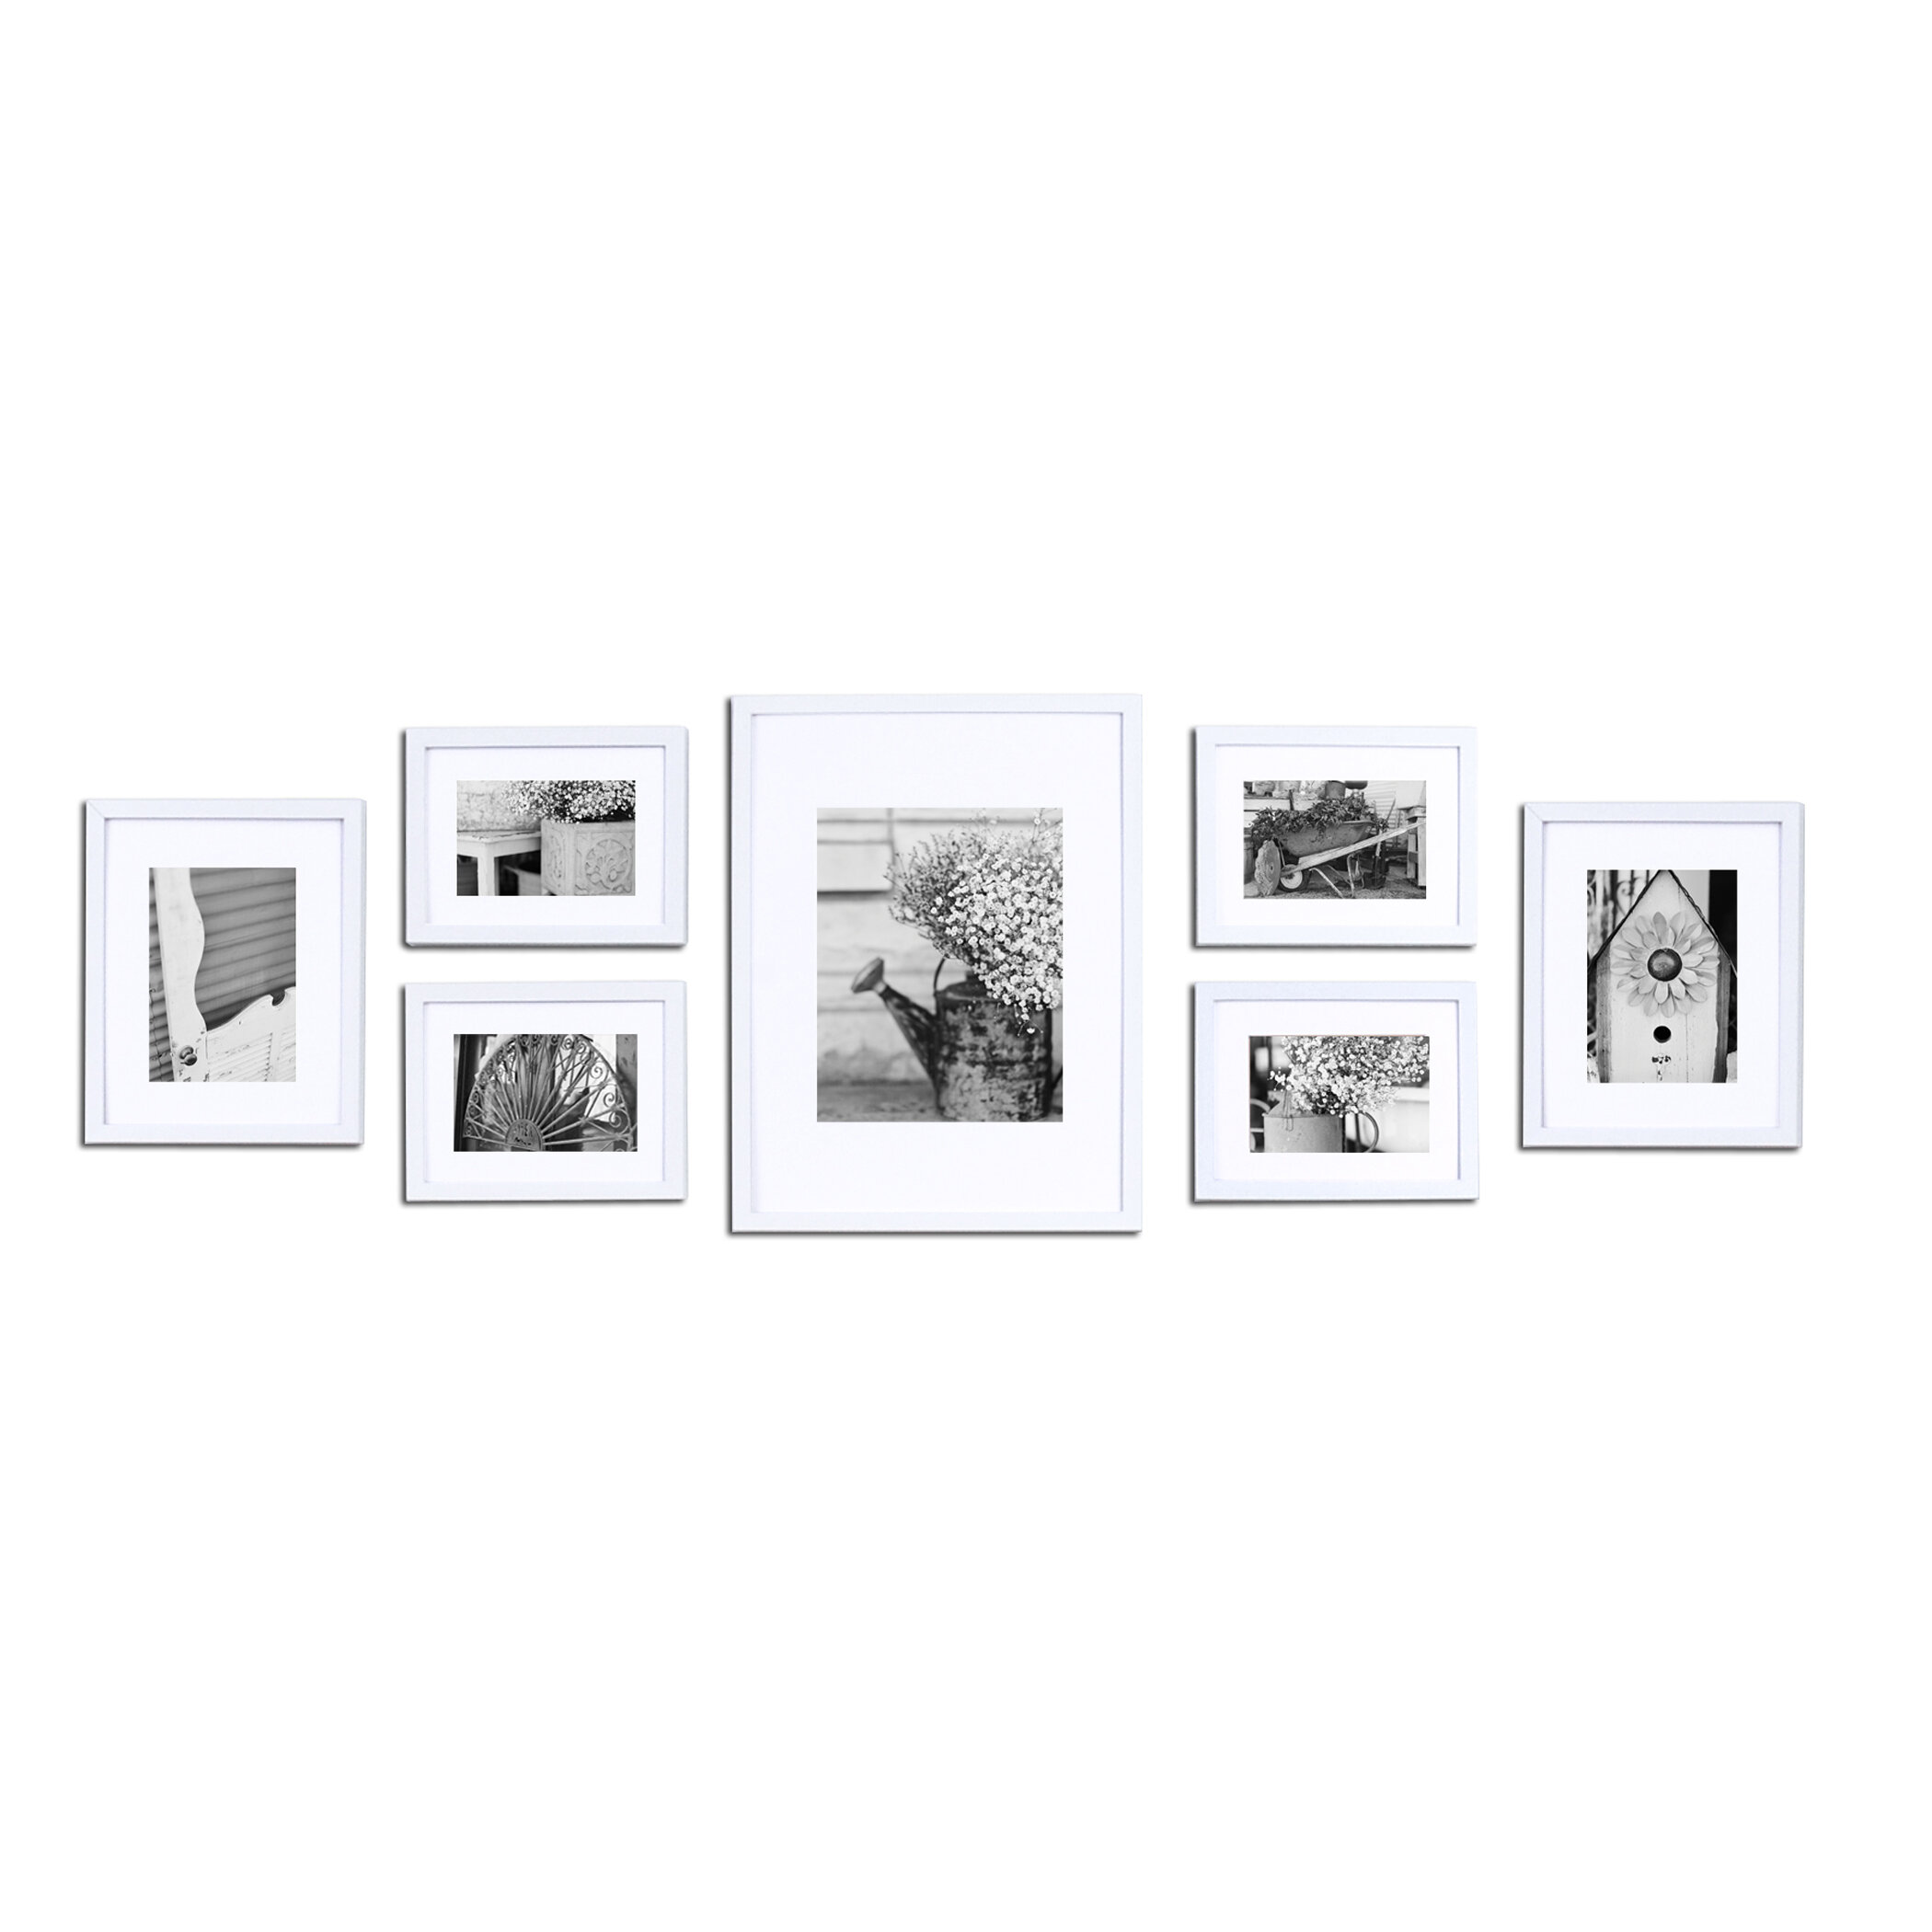 45529 Brown MCS Sand Line 8x10 Inch Wall Frame in 